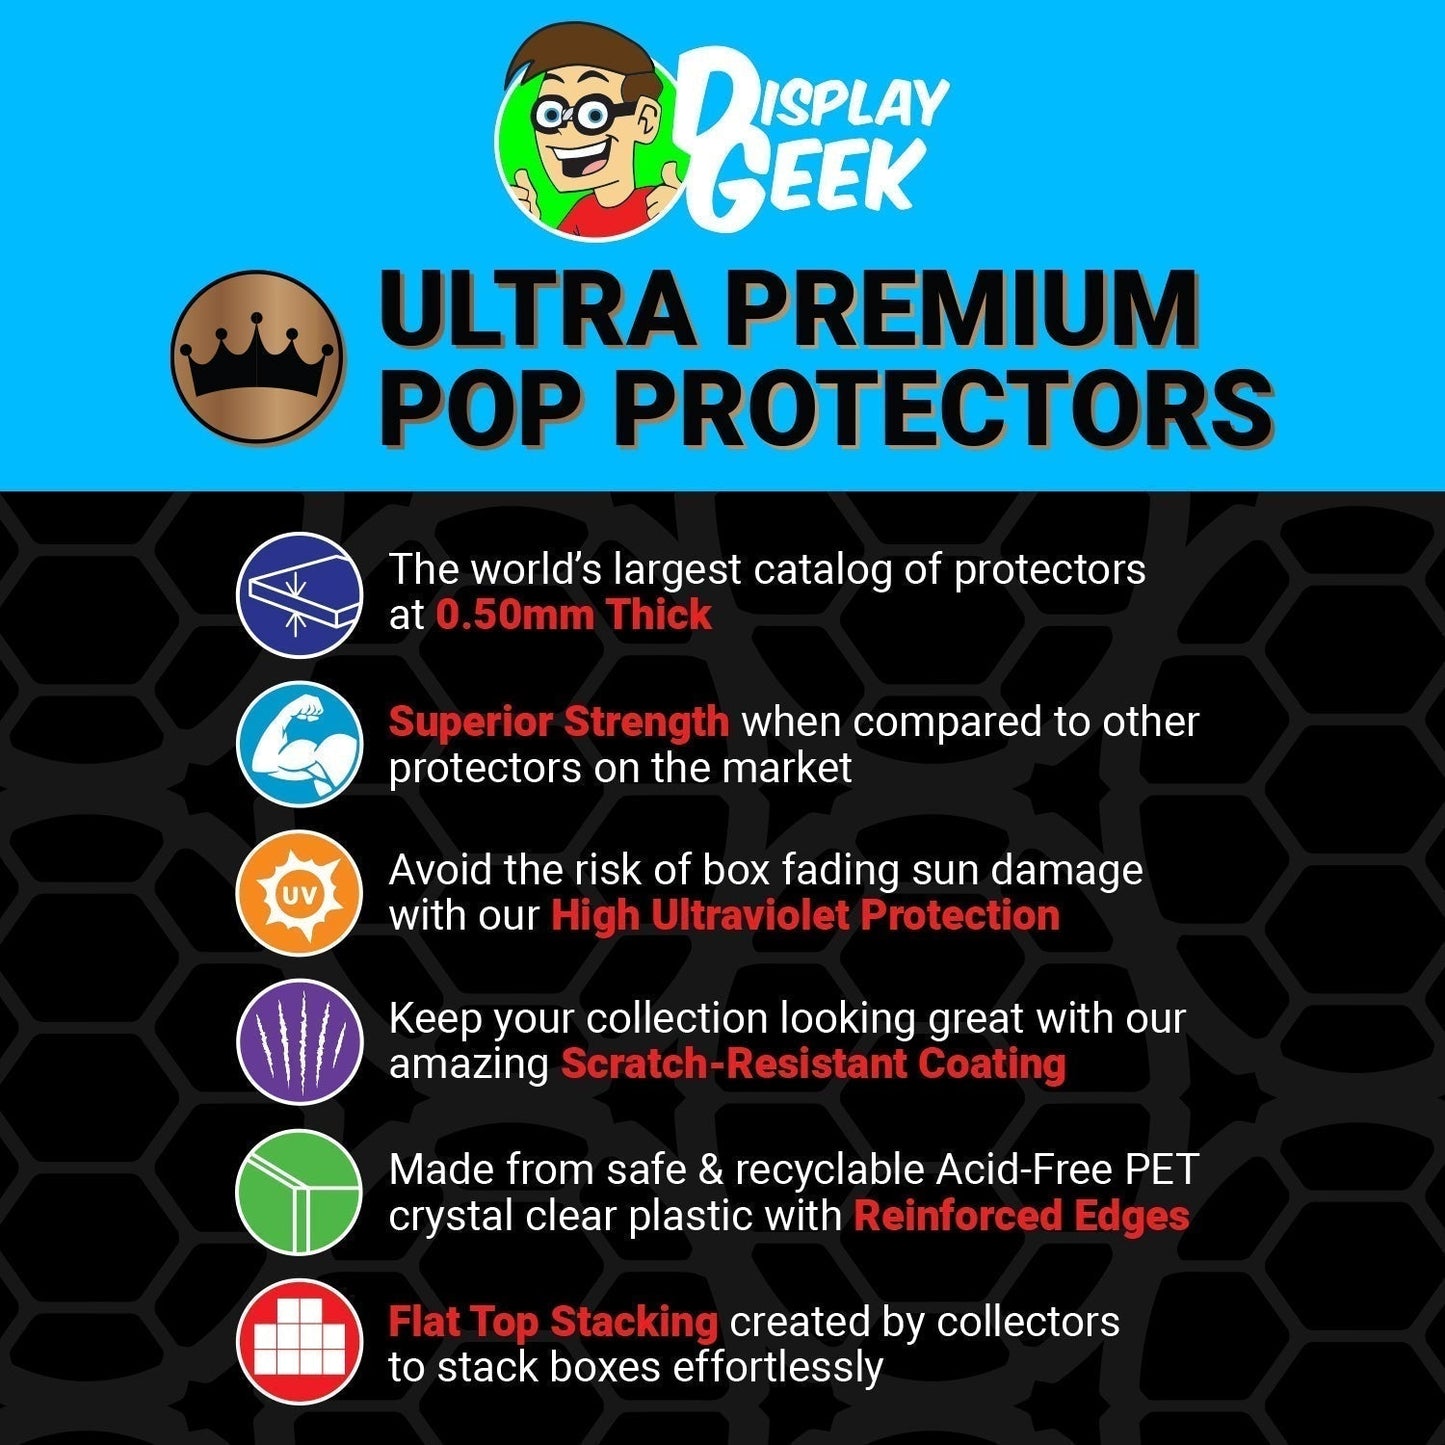 Pop Protector for Hollywood Tower Hotel and Mickey Mouse #31 Funko Pop Town - PPG Pop Protector Guide Search Created by Display Geek